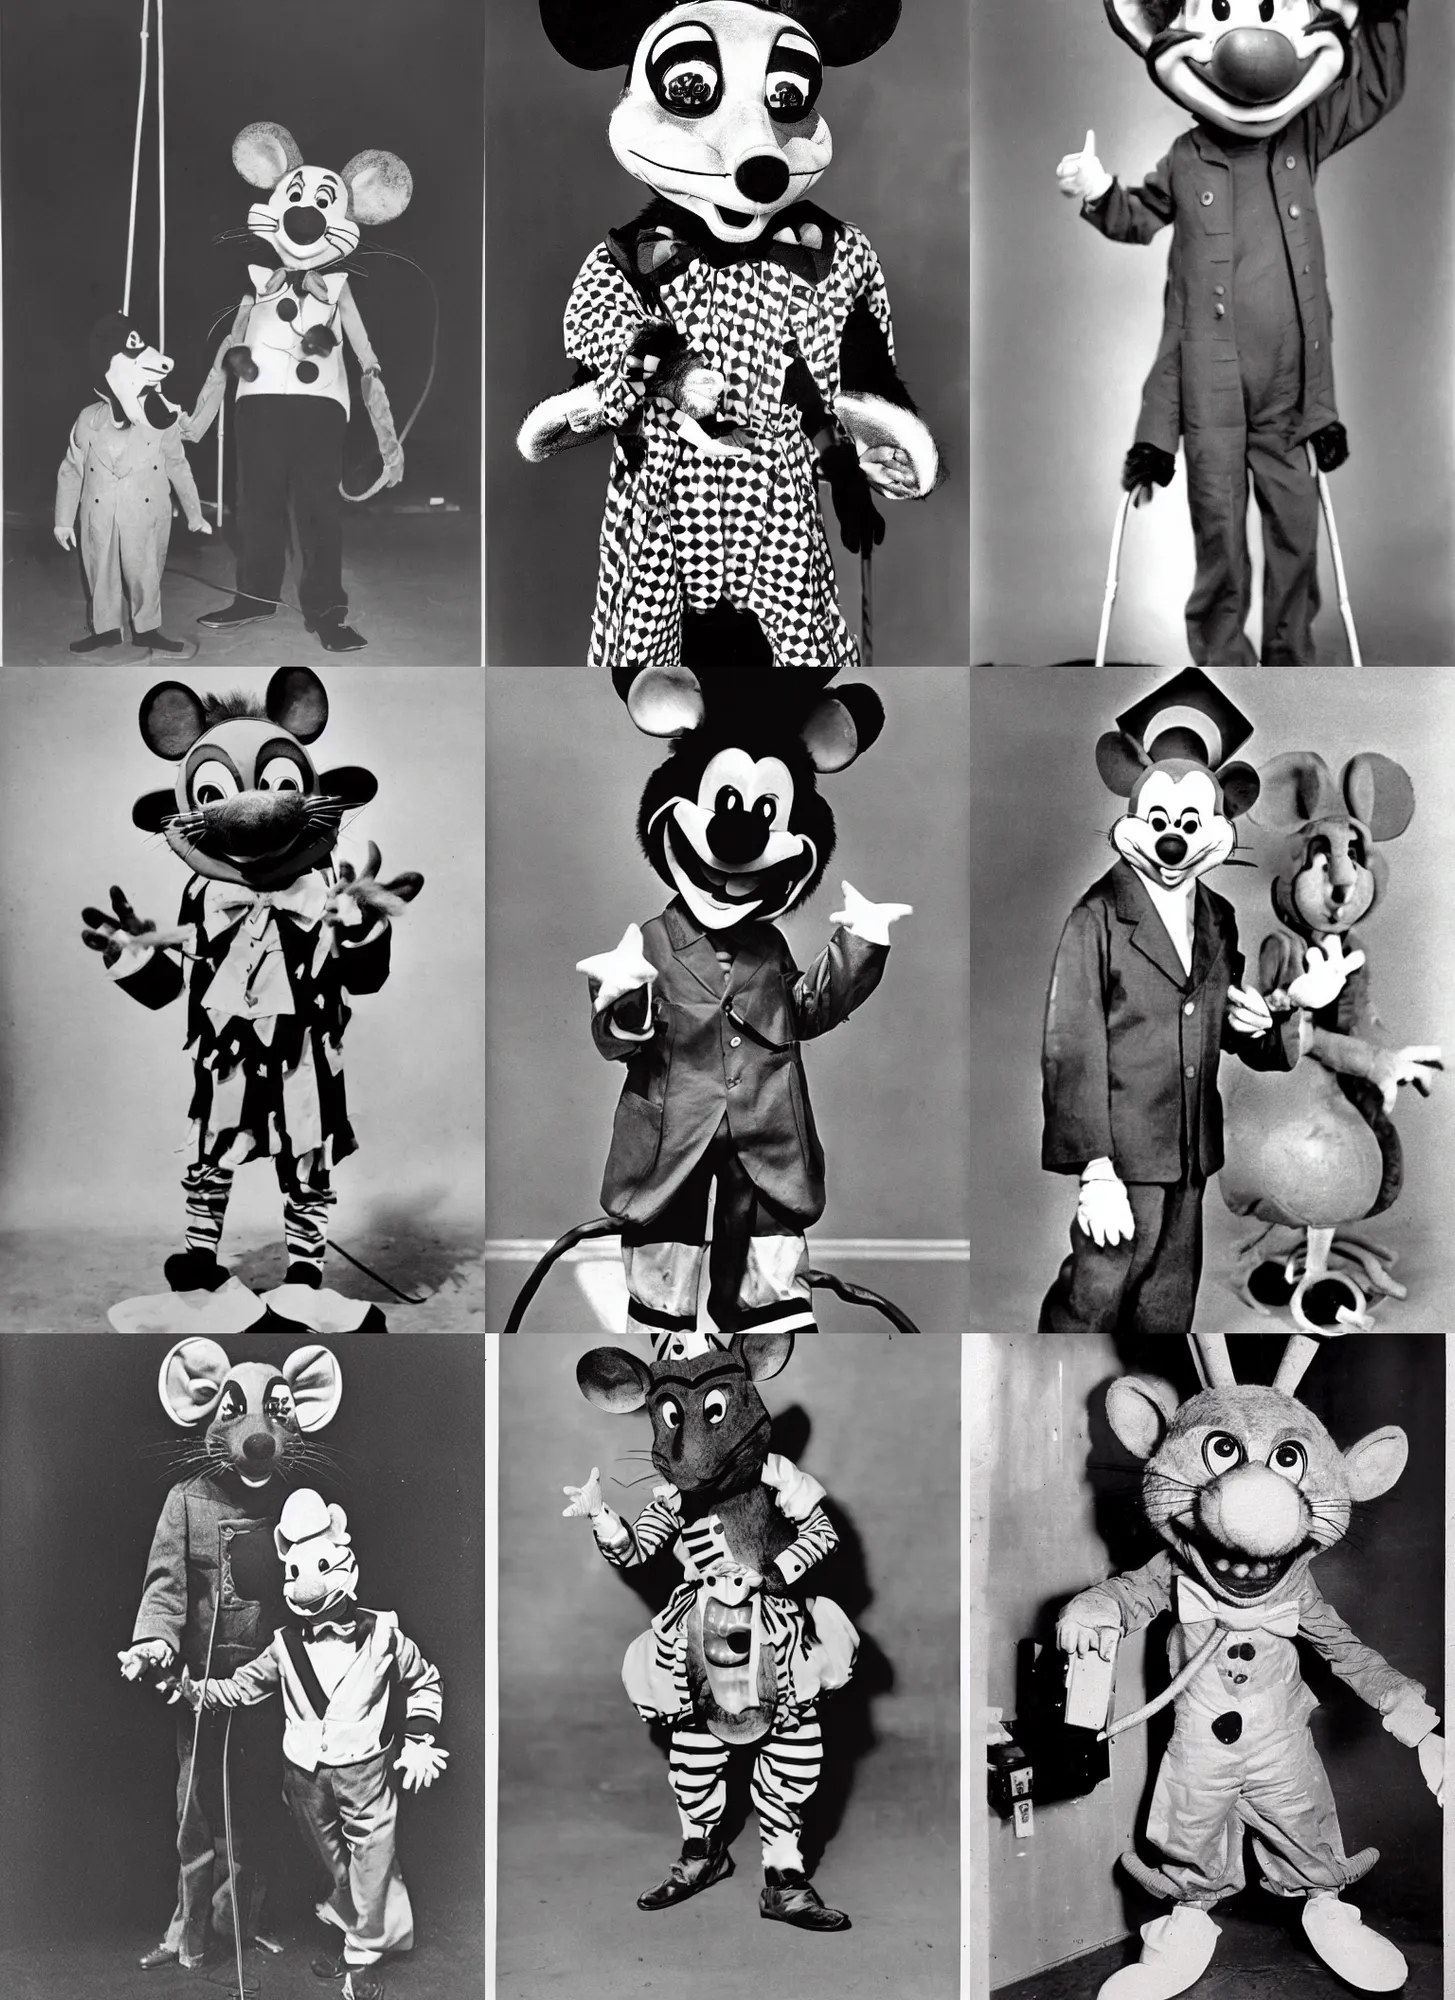 Prompt: Chuck E. Cheese mascot grainy 1940’s circus portrait of an anthropomorphic rat animatronic dressed like a clown, professional portrait HD, mouse, Chuck E. Cheese head, authentic, mouse, costume weird creepy, off putting, nightmare fuel, Chuck E. Cheese